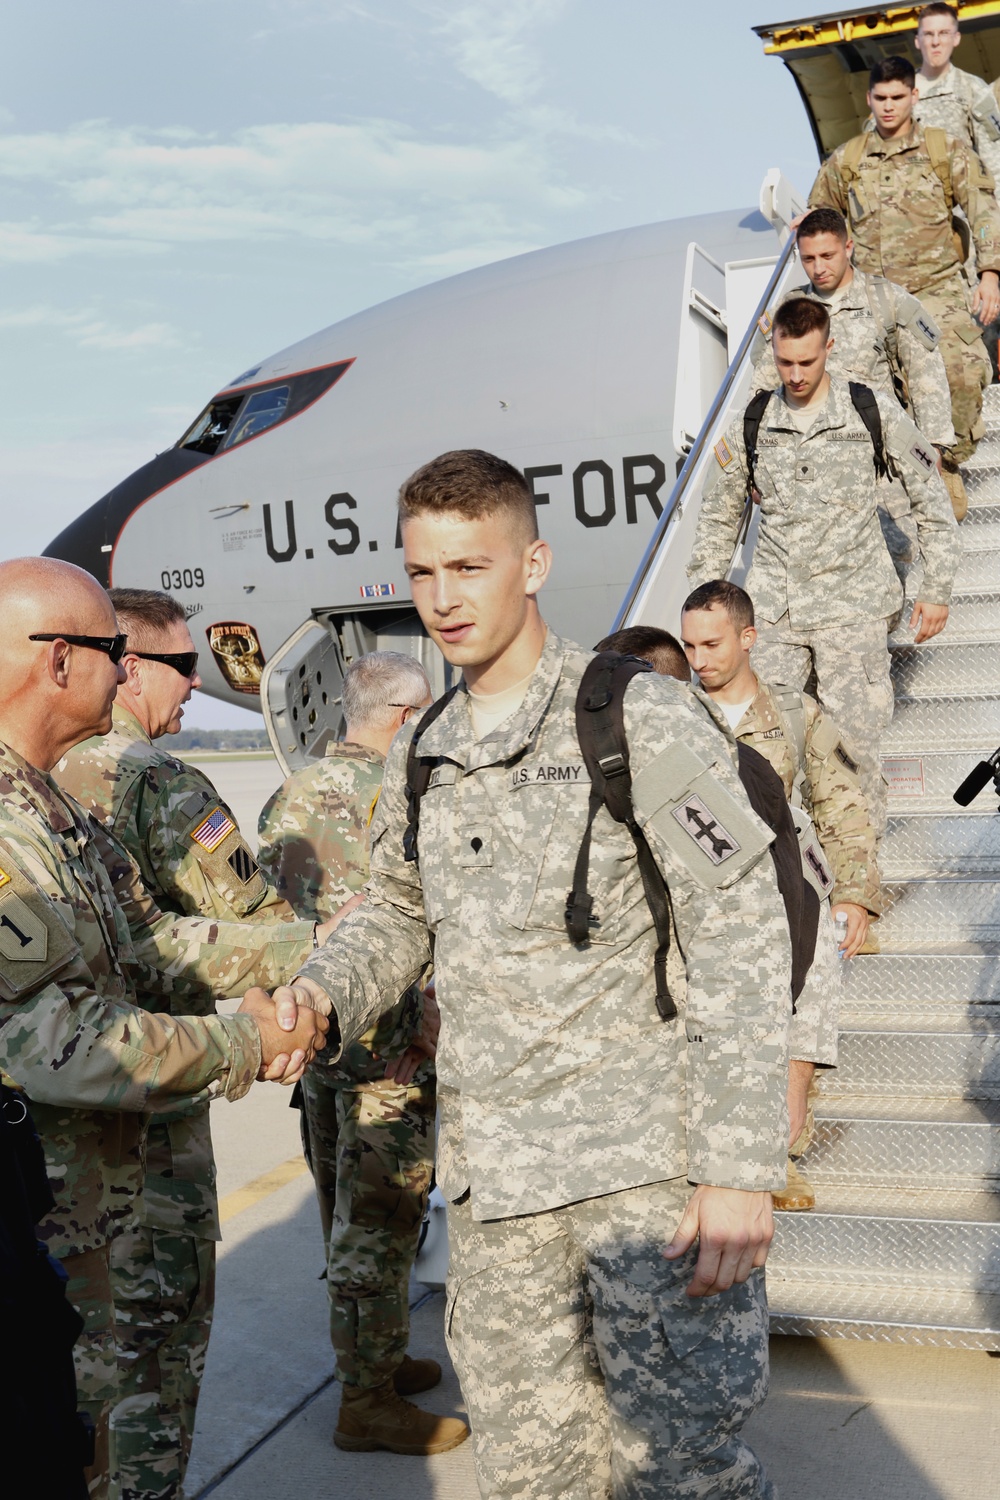 Red Arrow Soldiers return from providing Hurricane Irma relief in Florida